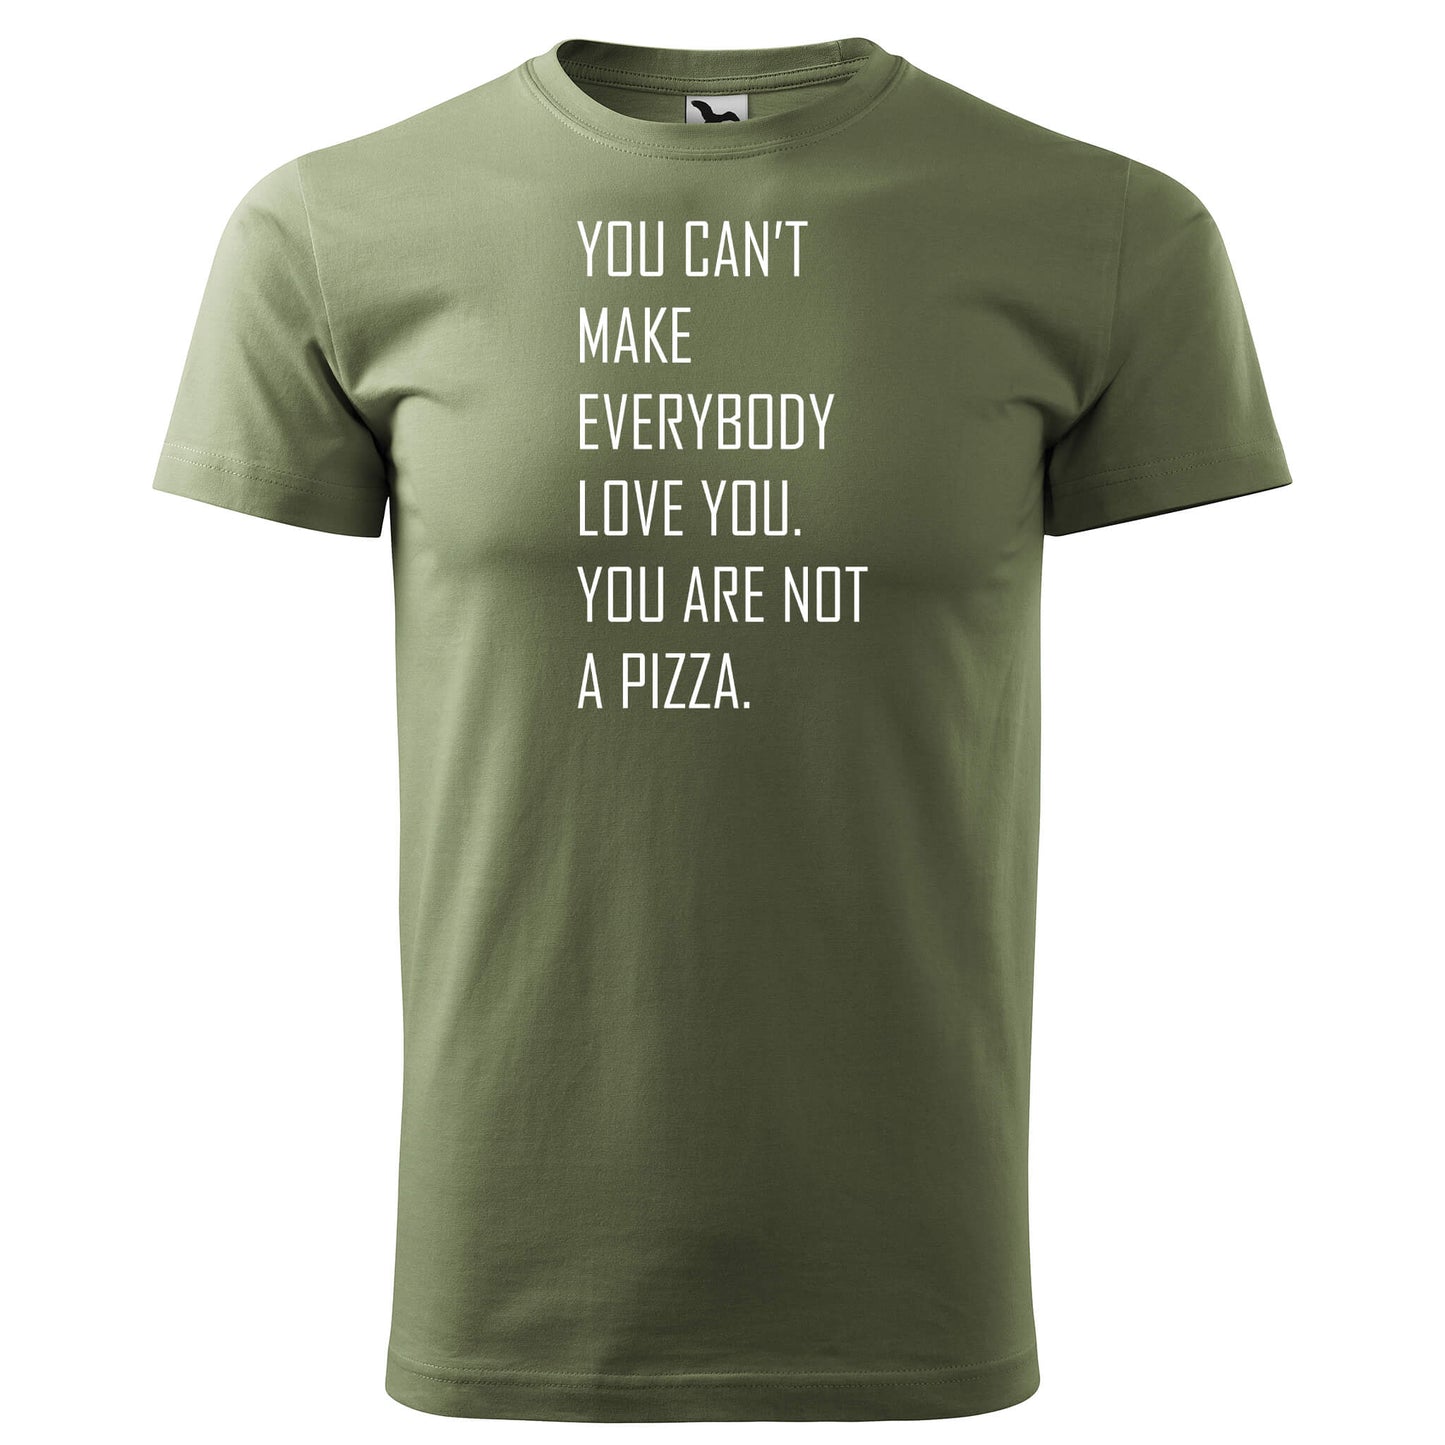 T-shirt - You can't make everybody love you, you are not a pizza - rvdesignprint